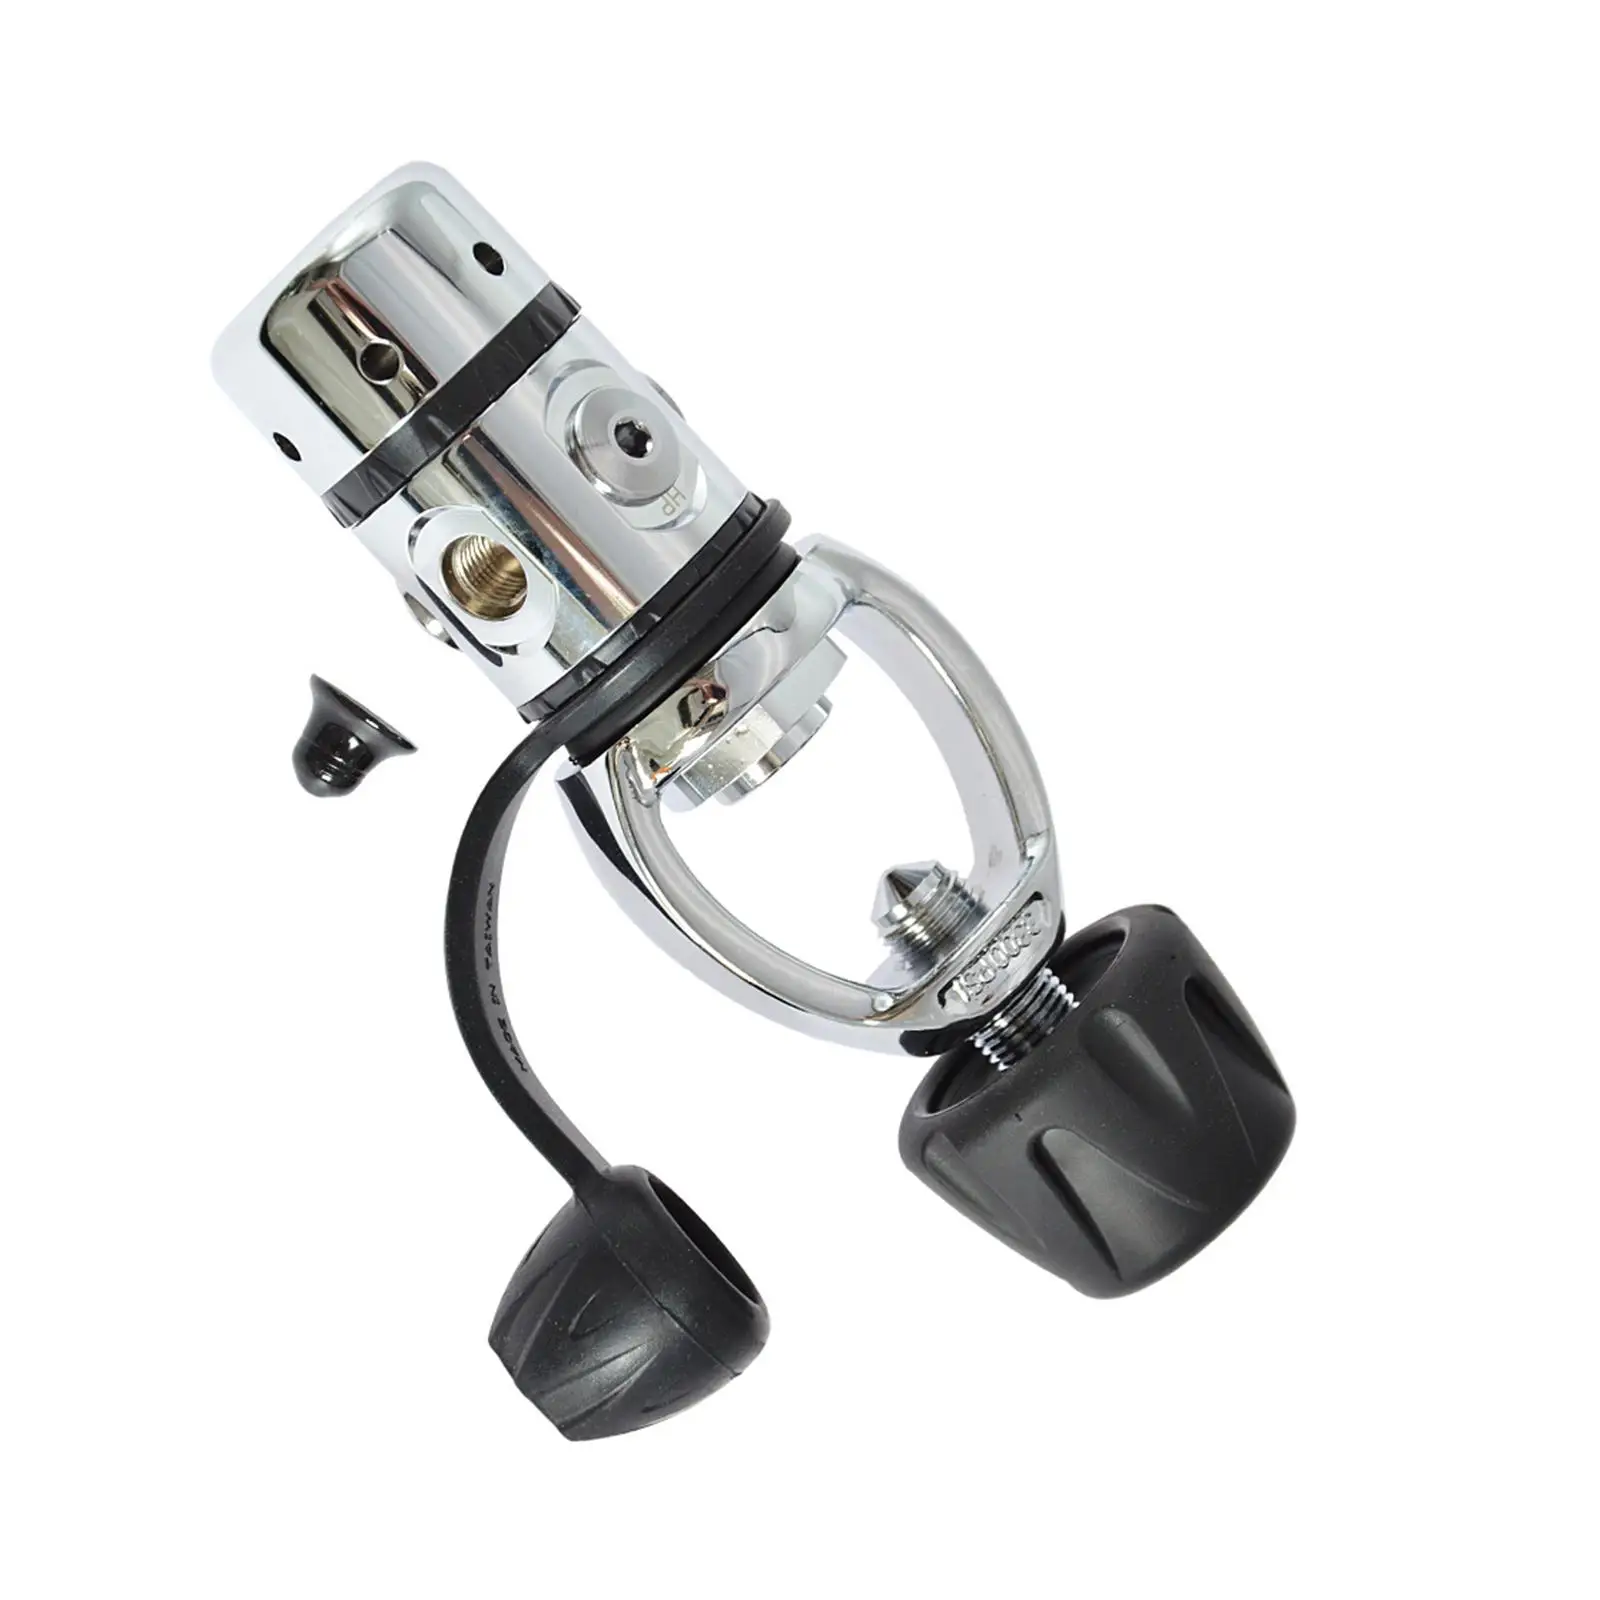 Piston Diving First Stage Regulator with 1 HP Ports and 4 LP Ports Yoke Type for Underwater Diving